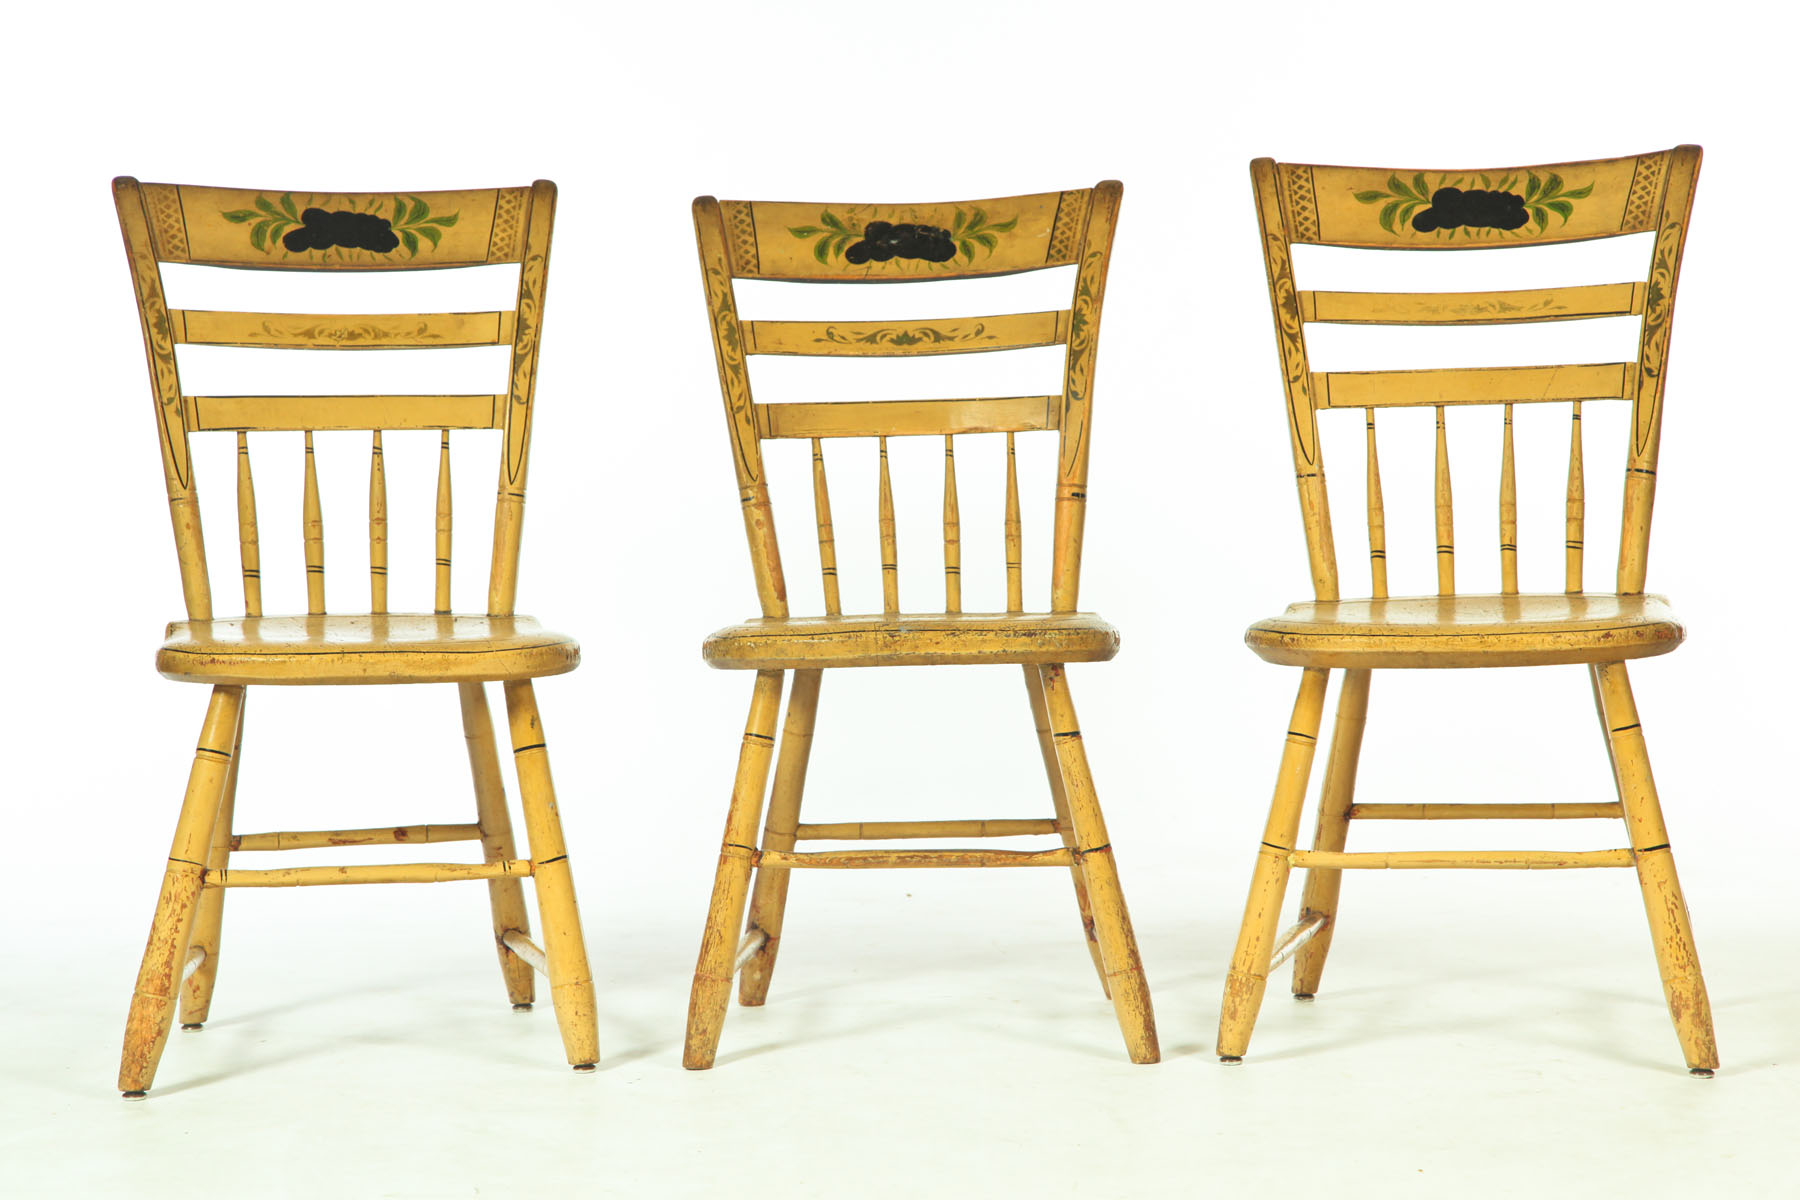 SET OF FIVE DECORATED CHAIRS. 